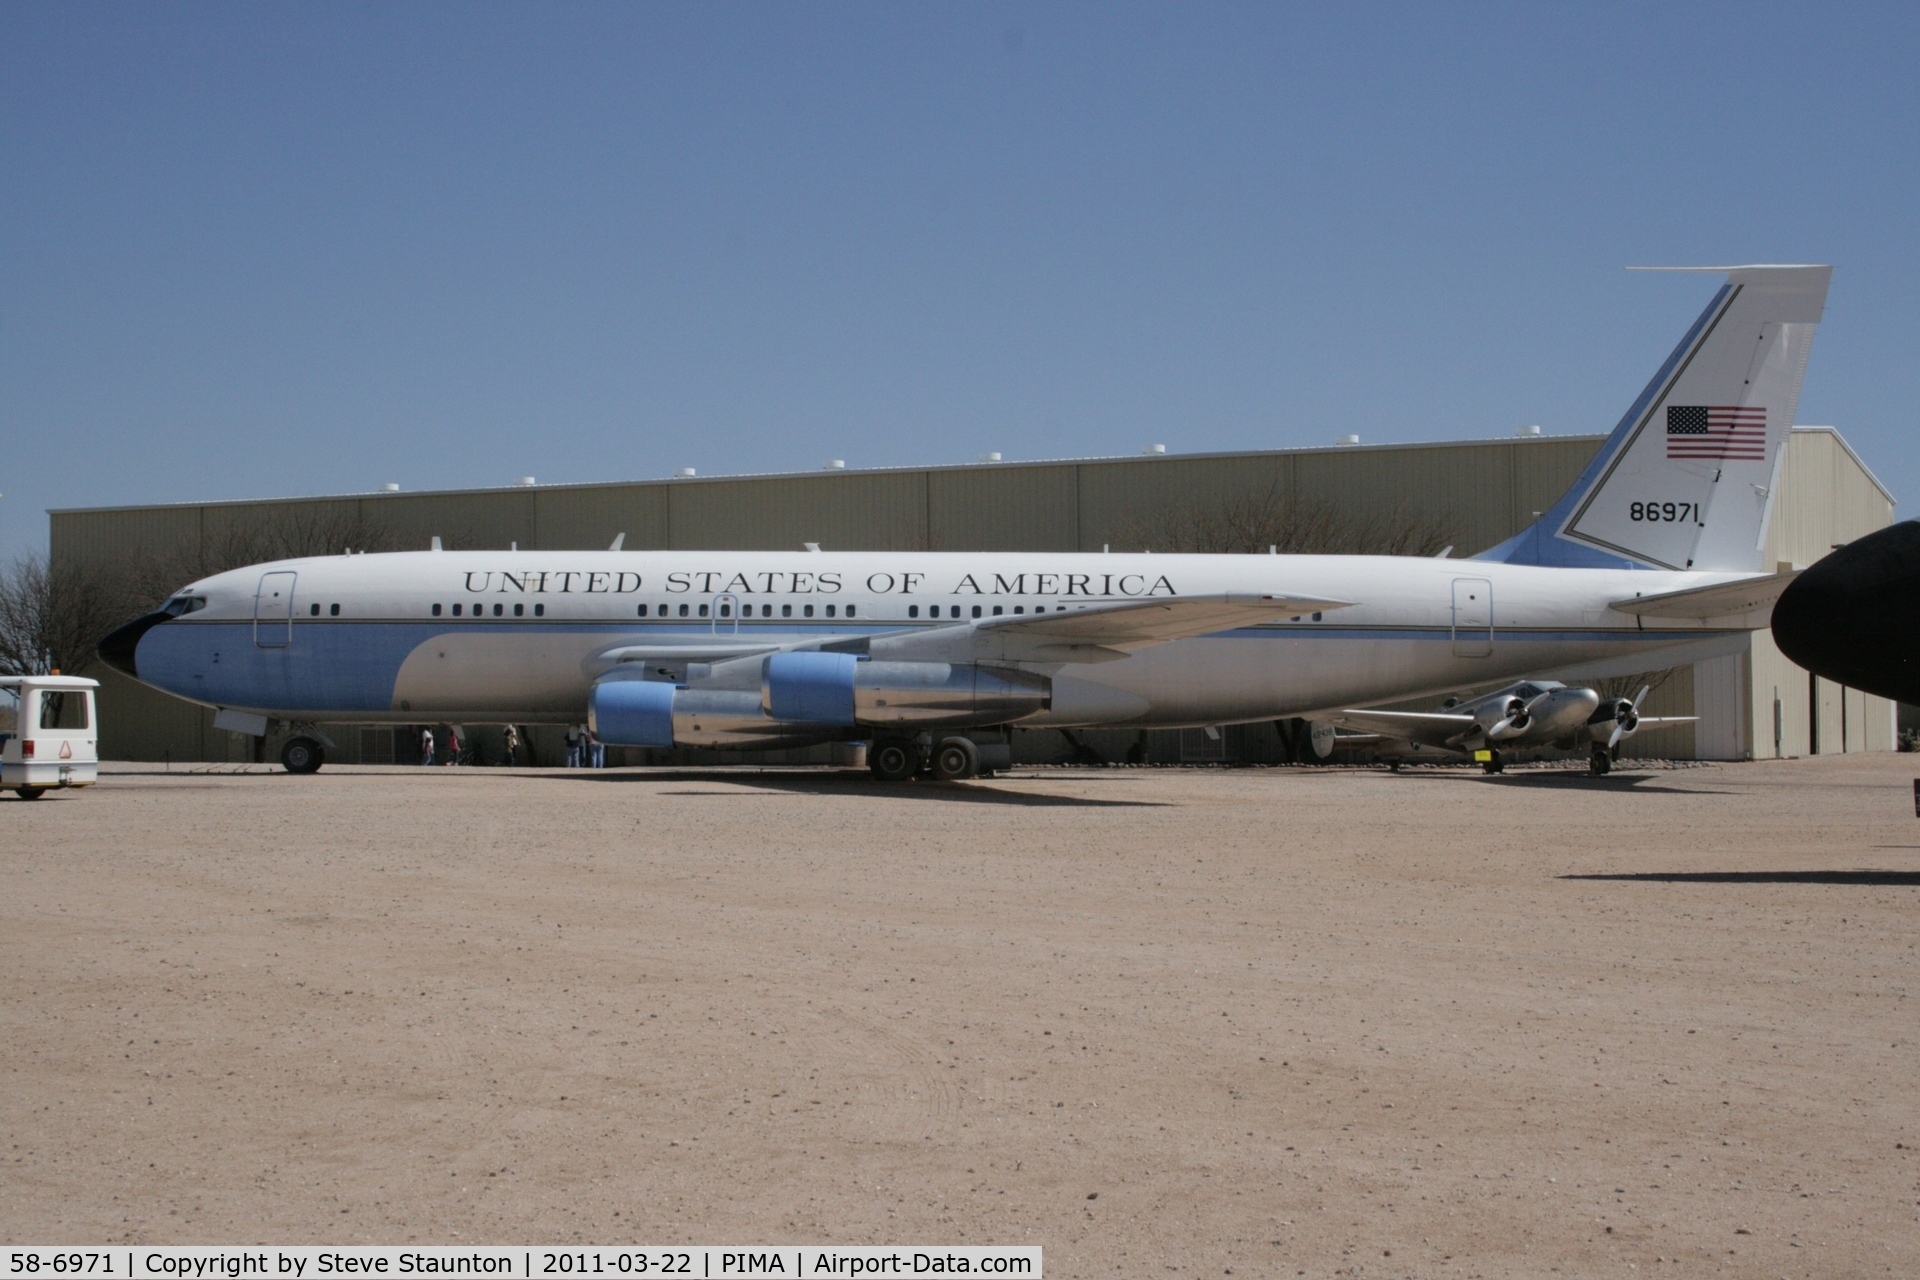 58-6971, 1959 Boeing VC-137B C/N 17926/40, Taken at Pima Air and Space Museum, in March 2011 whilst on an Aeroprint Aviation tour